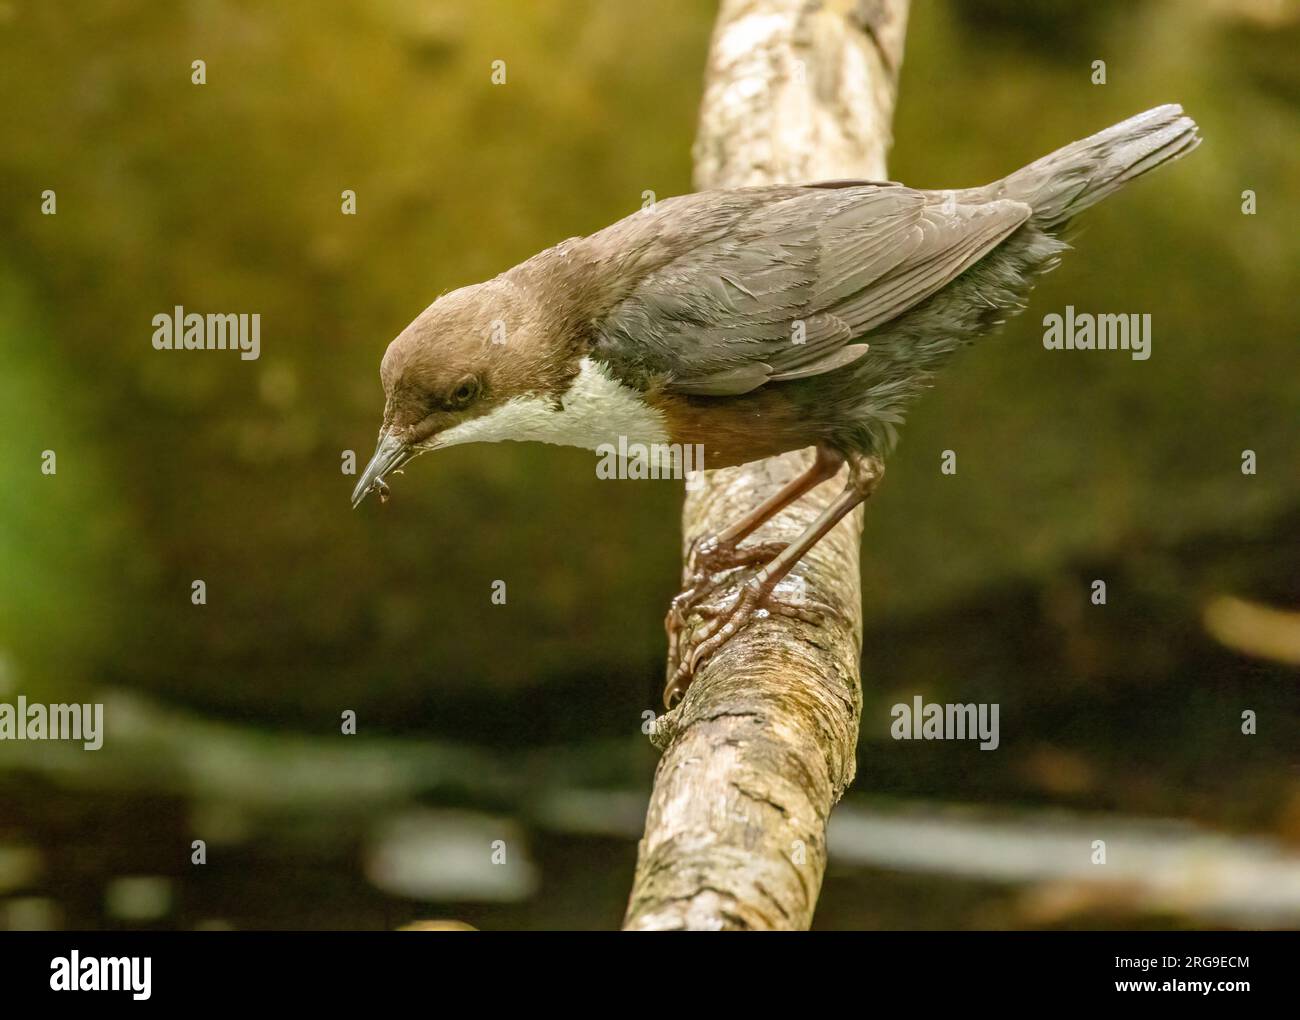 Dipper bird gathering bugs from the river to feed young Stock Photo